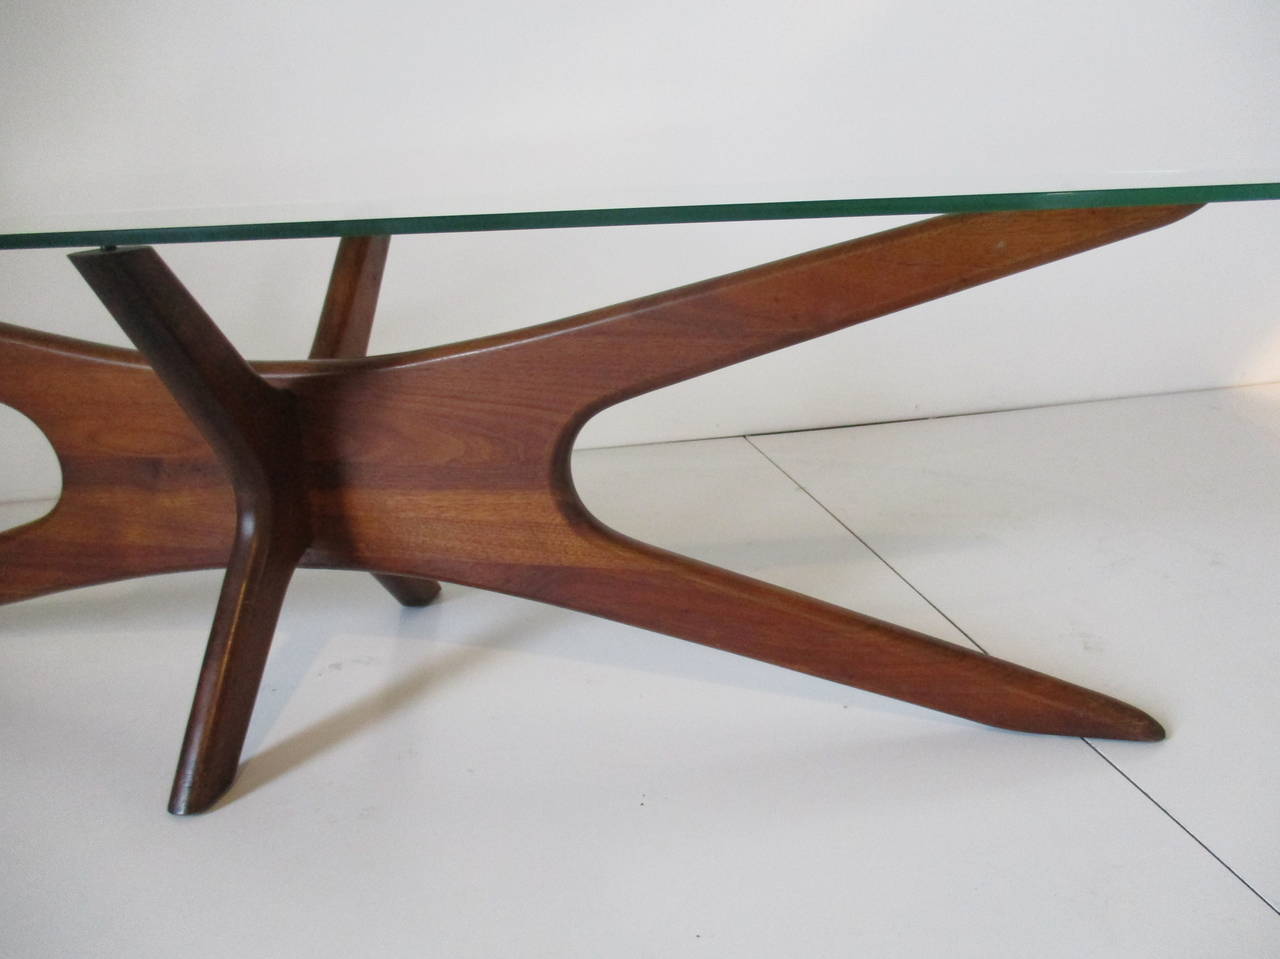 A sculptural solid walnut based jacks coffee table with oval glass top in the style of Kagan.